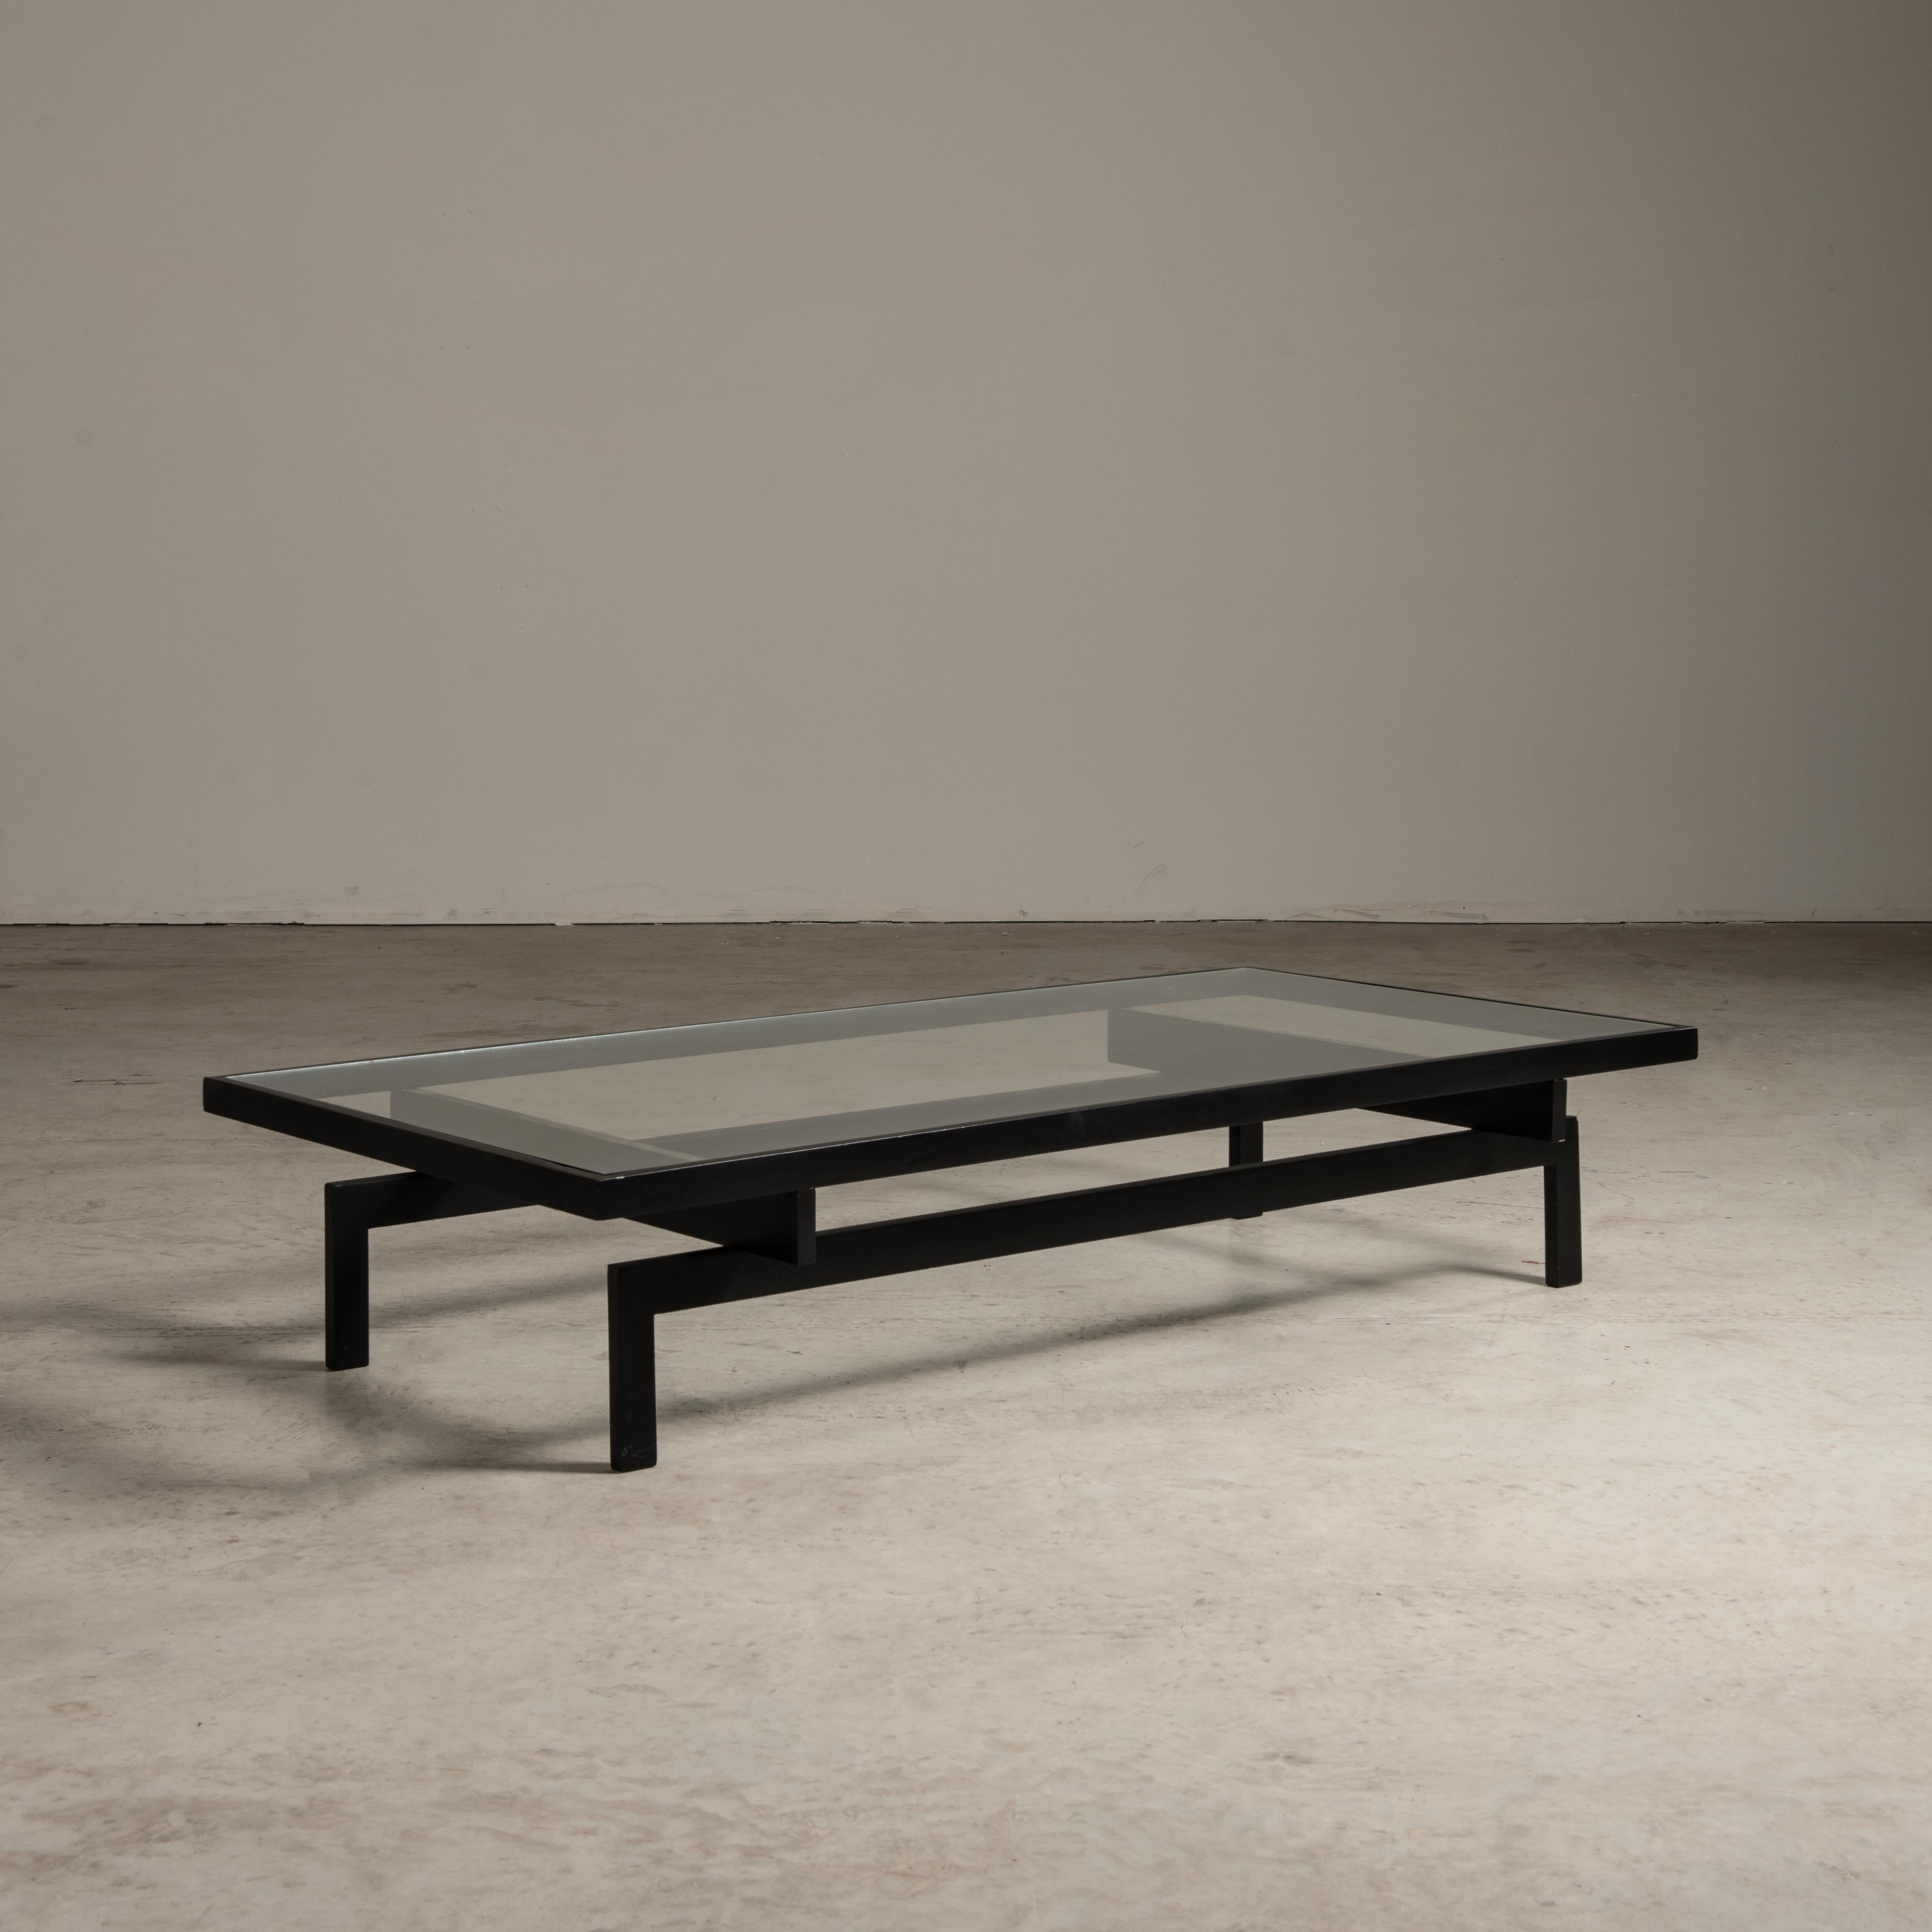 Embodying the essence of Brazilian mid-century modern design, this center table by Branco & Preto studio is a statement piece that harmoniously blends the sleek lines of contemporary aesthetics with the rich tradition of Brazilian furniture design.